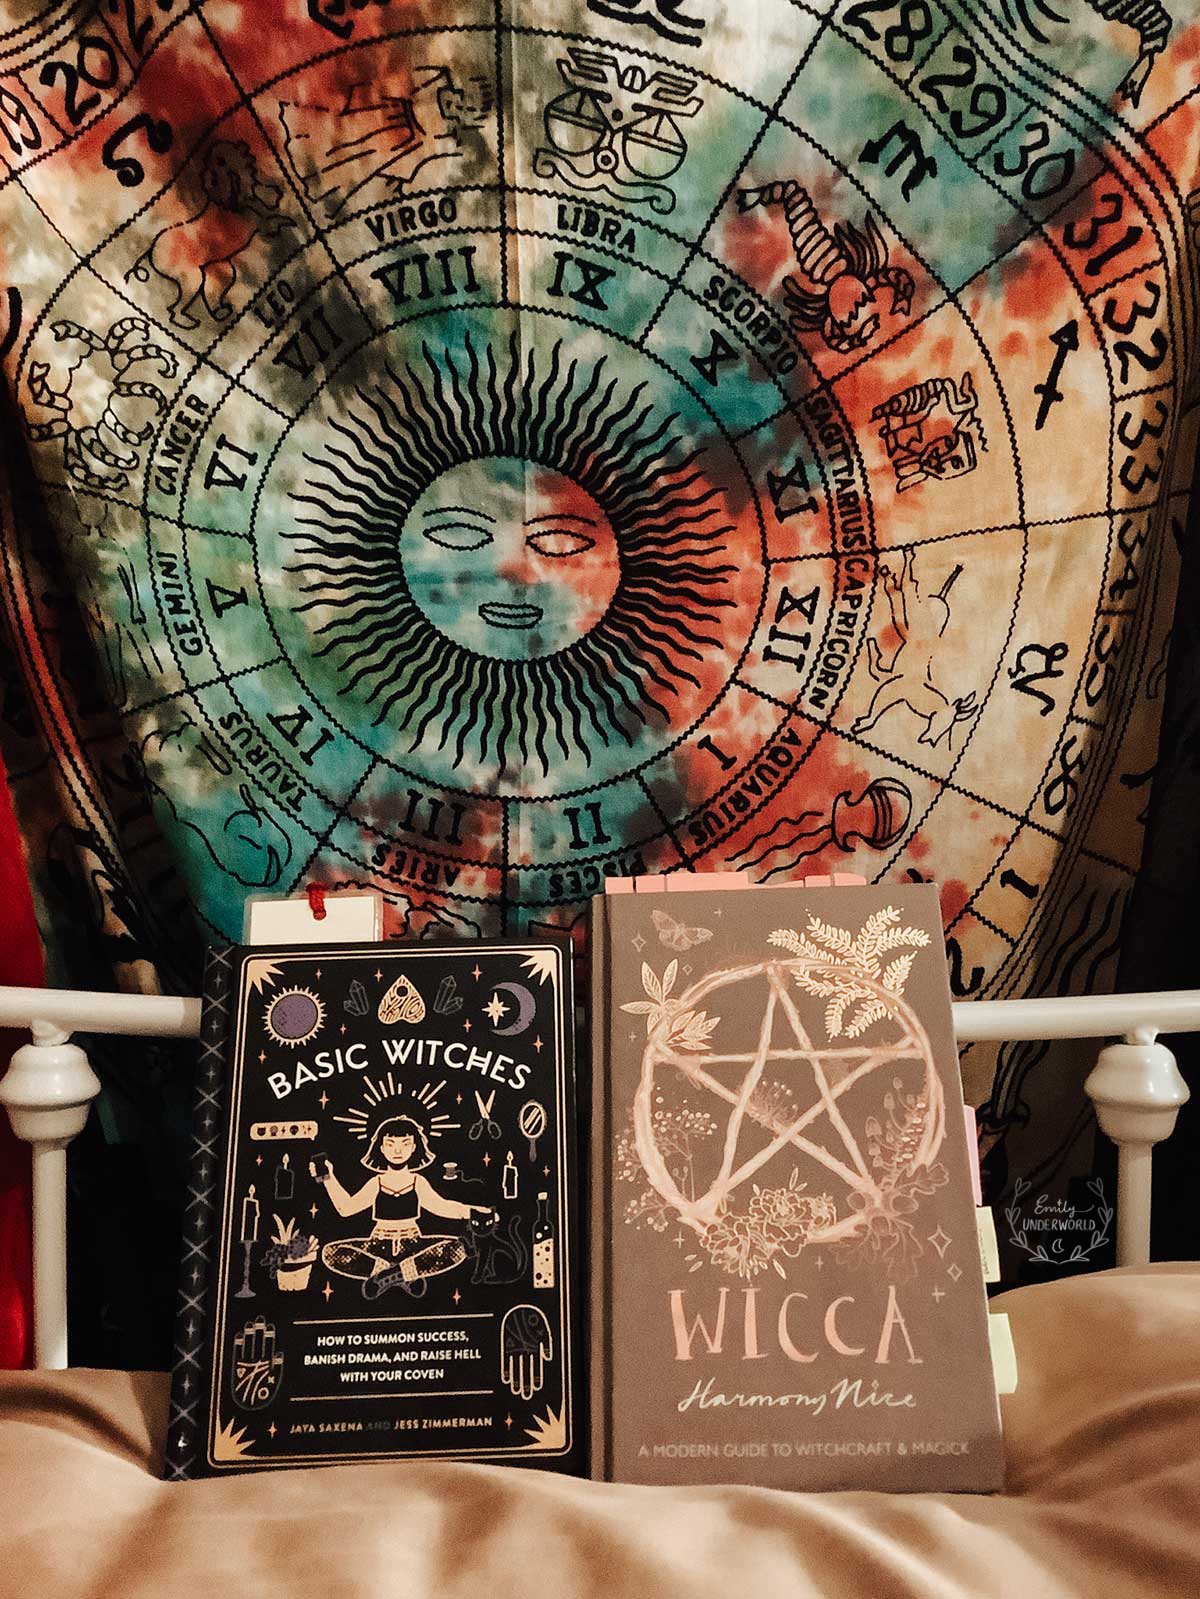 Witchcraft Books I Don’t Recommend